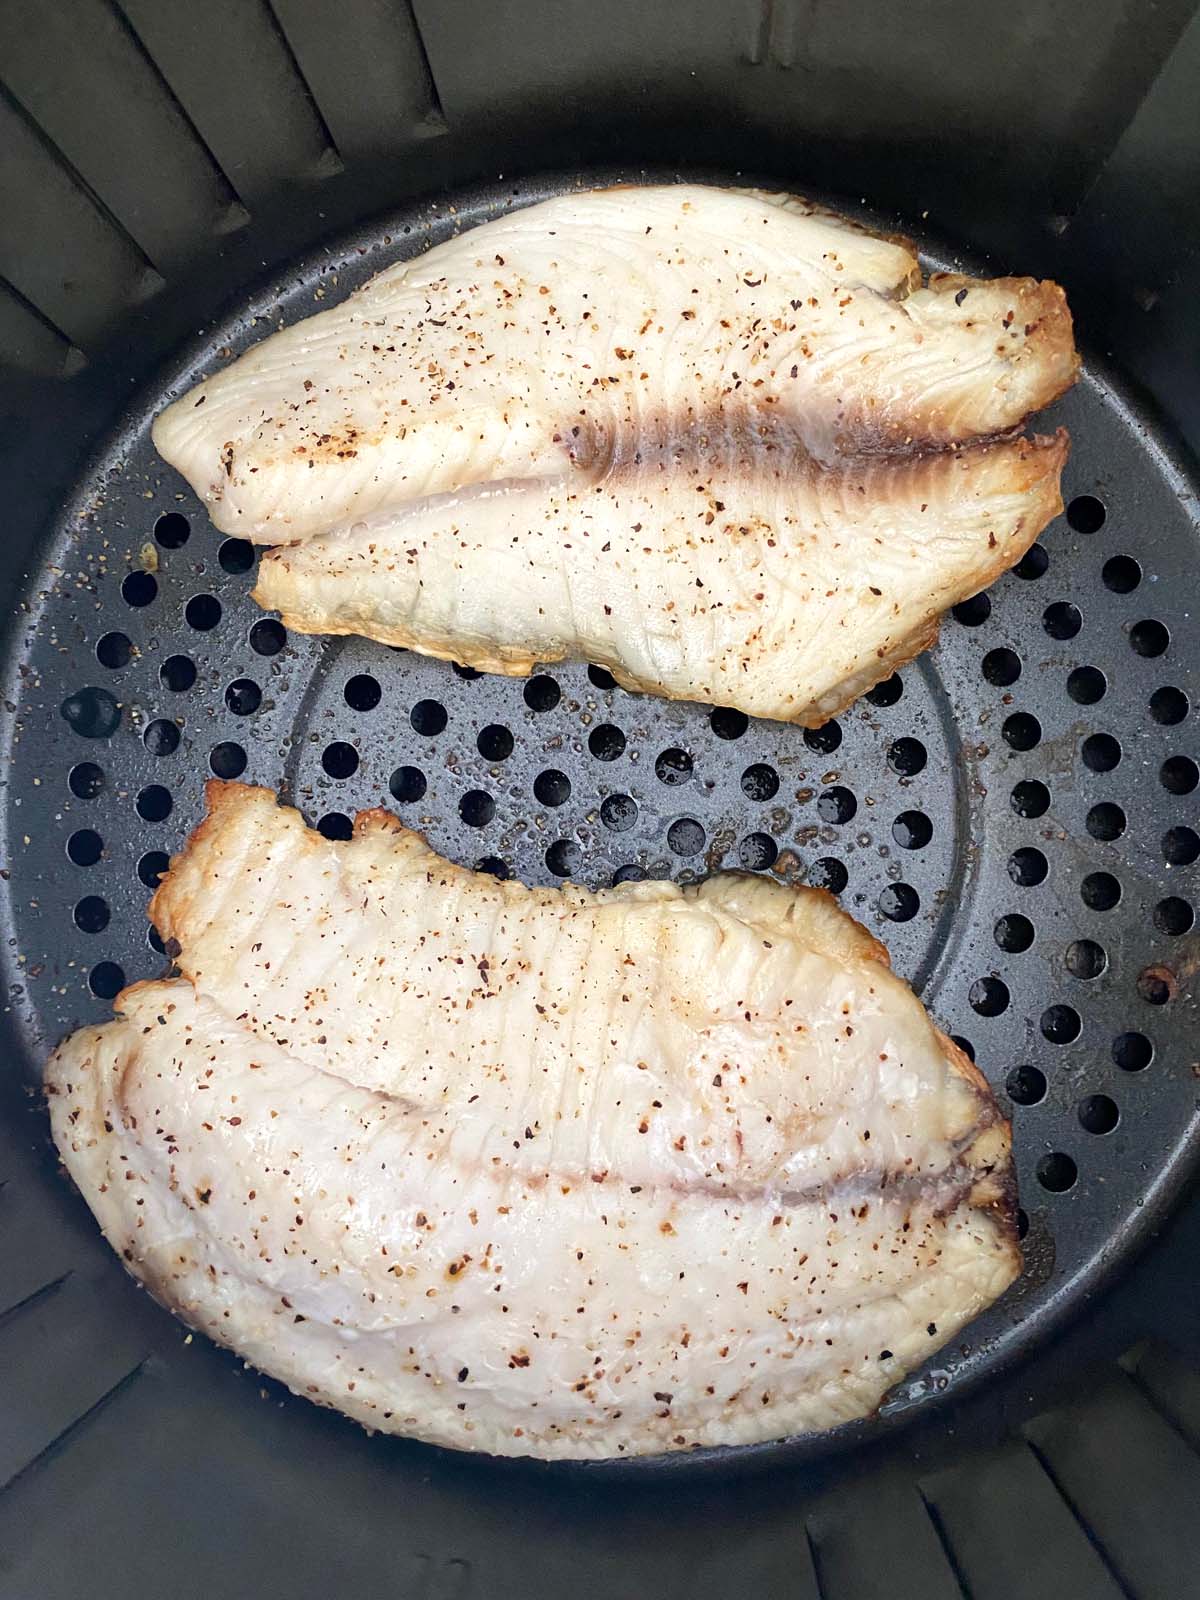 Cooked tilapia filets in an air fryer.